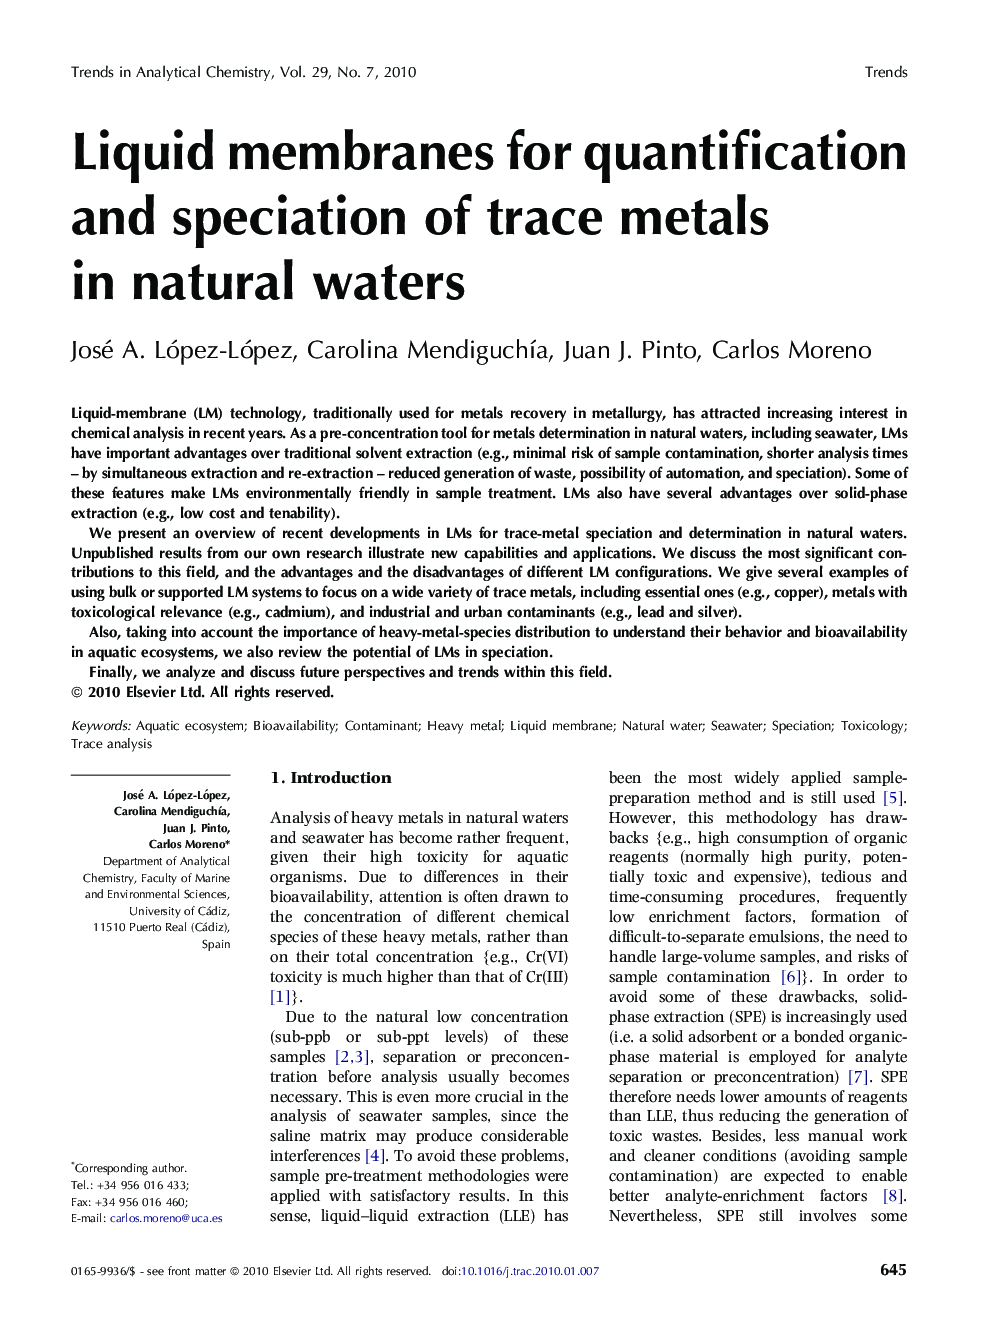 Liquid membranes for quantification and speciation of trace metals in natural waters